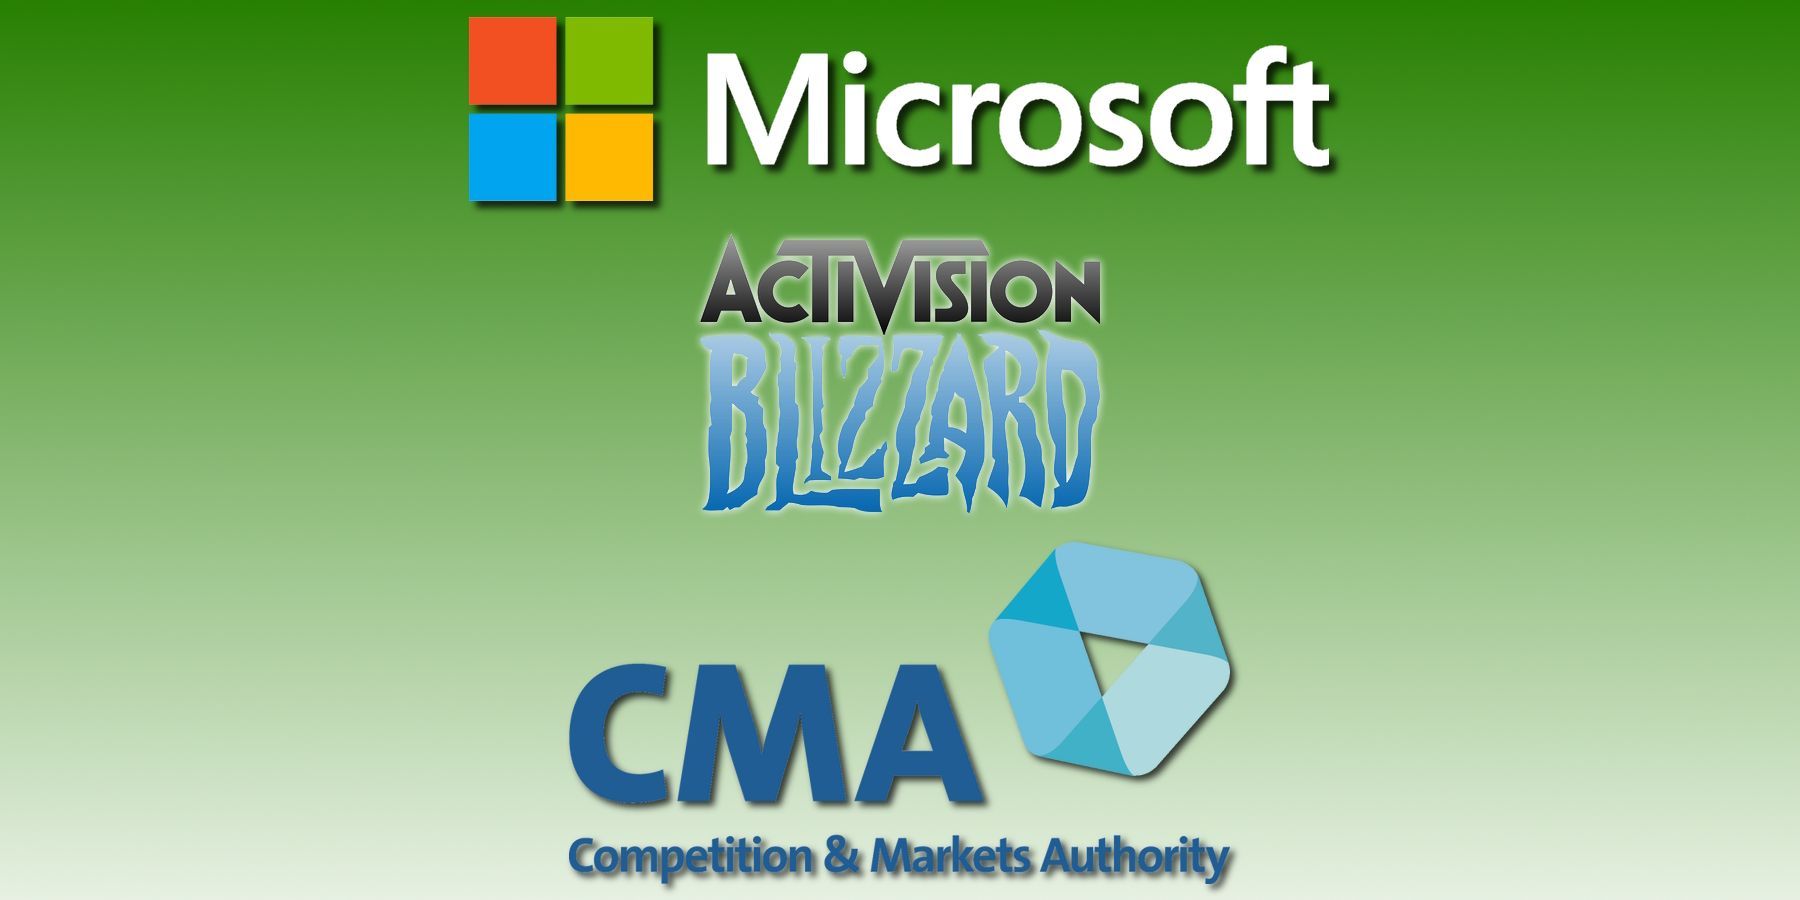 Microsoft Acquisition of Activision Blizzard Could Be Blocked for 10 Years